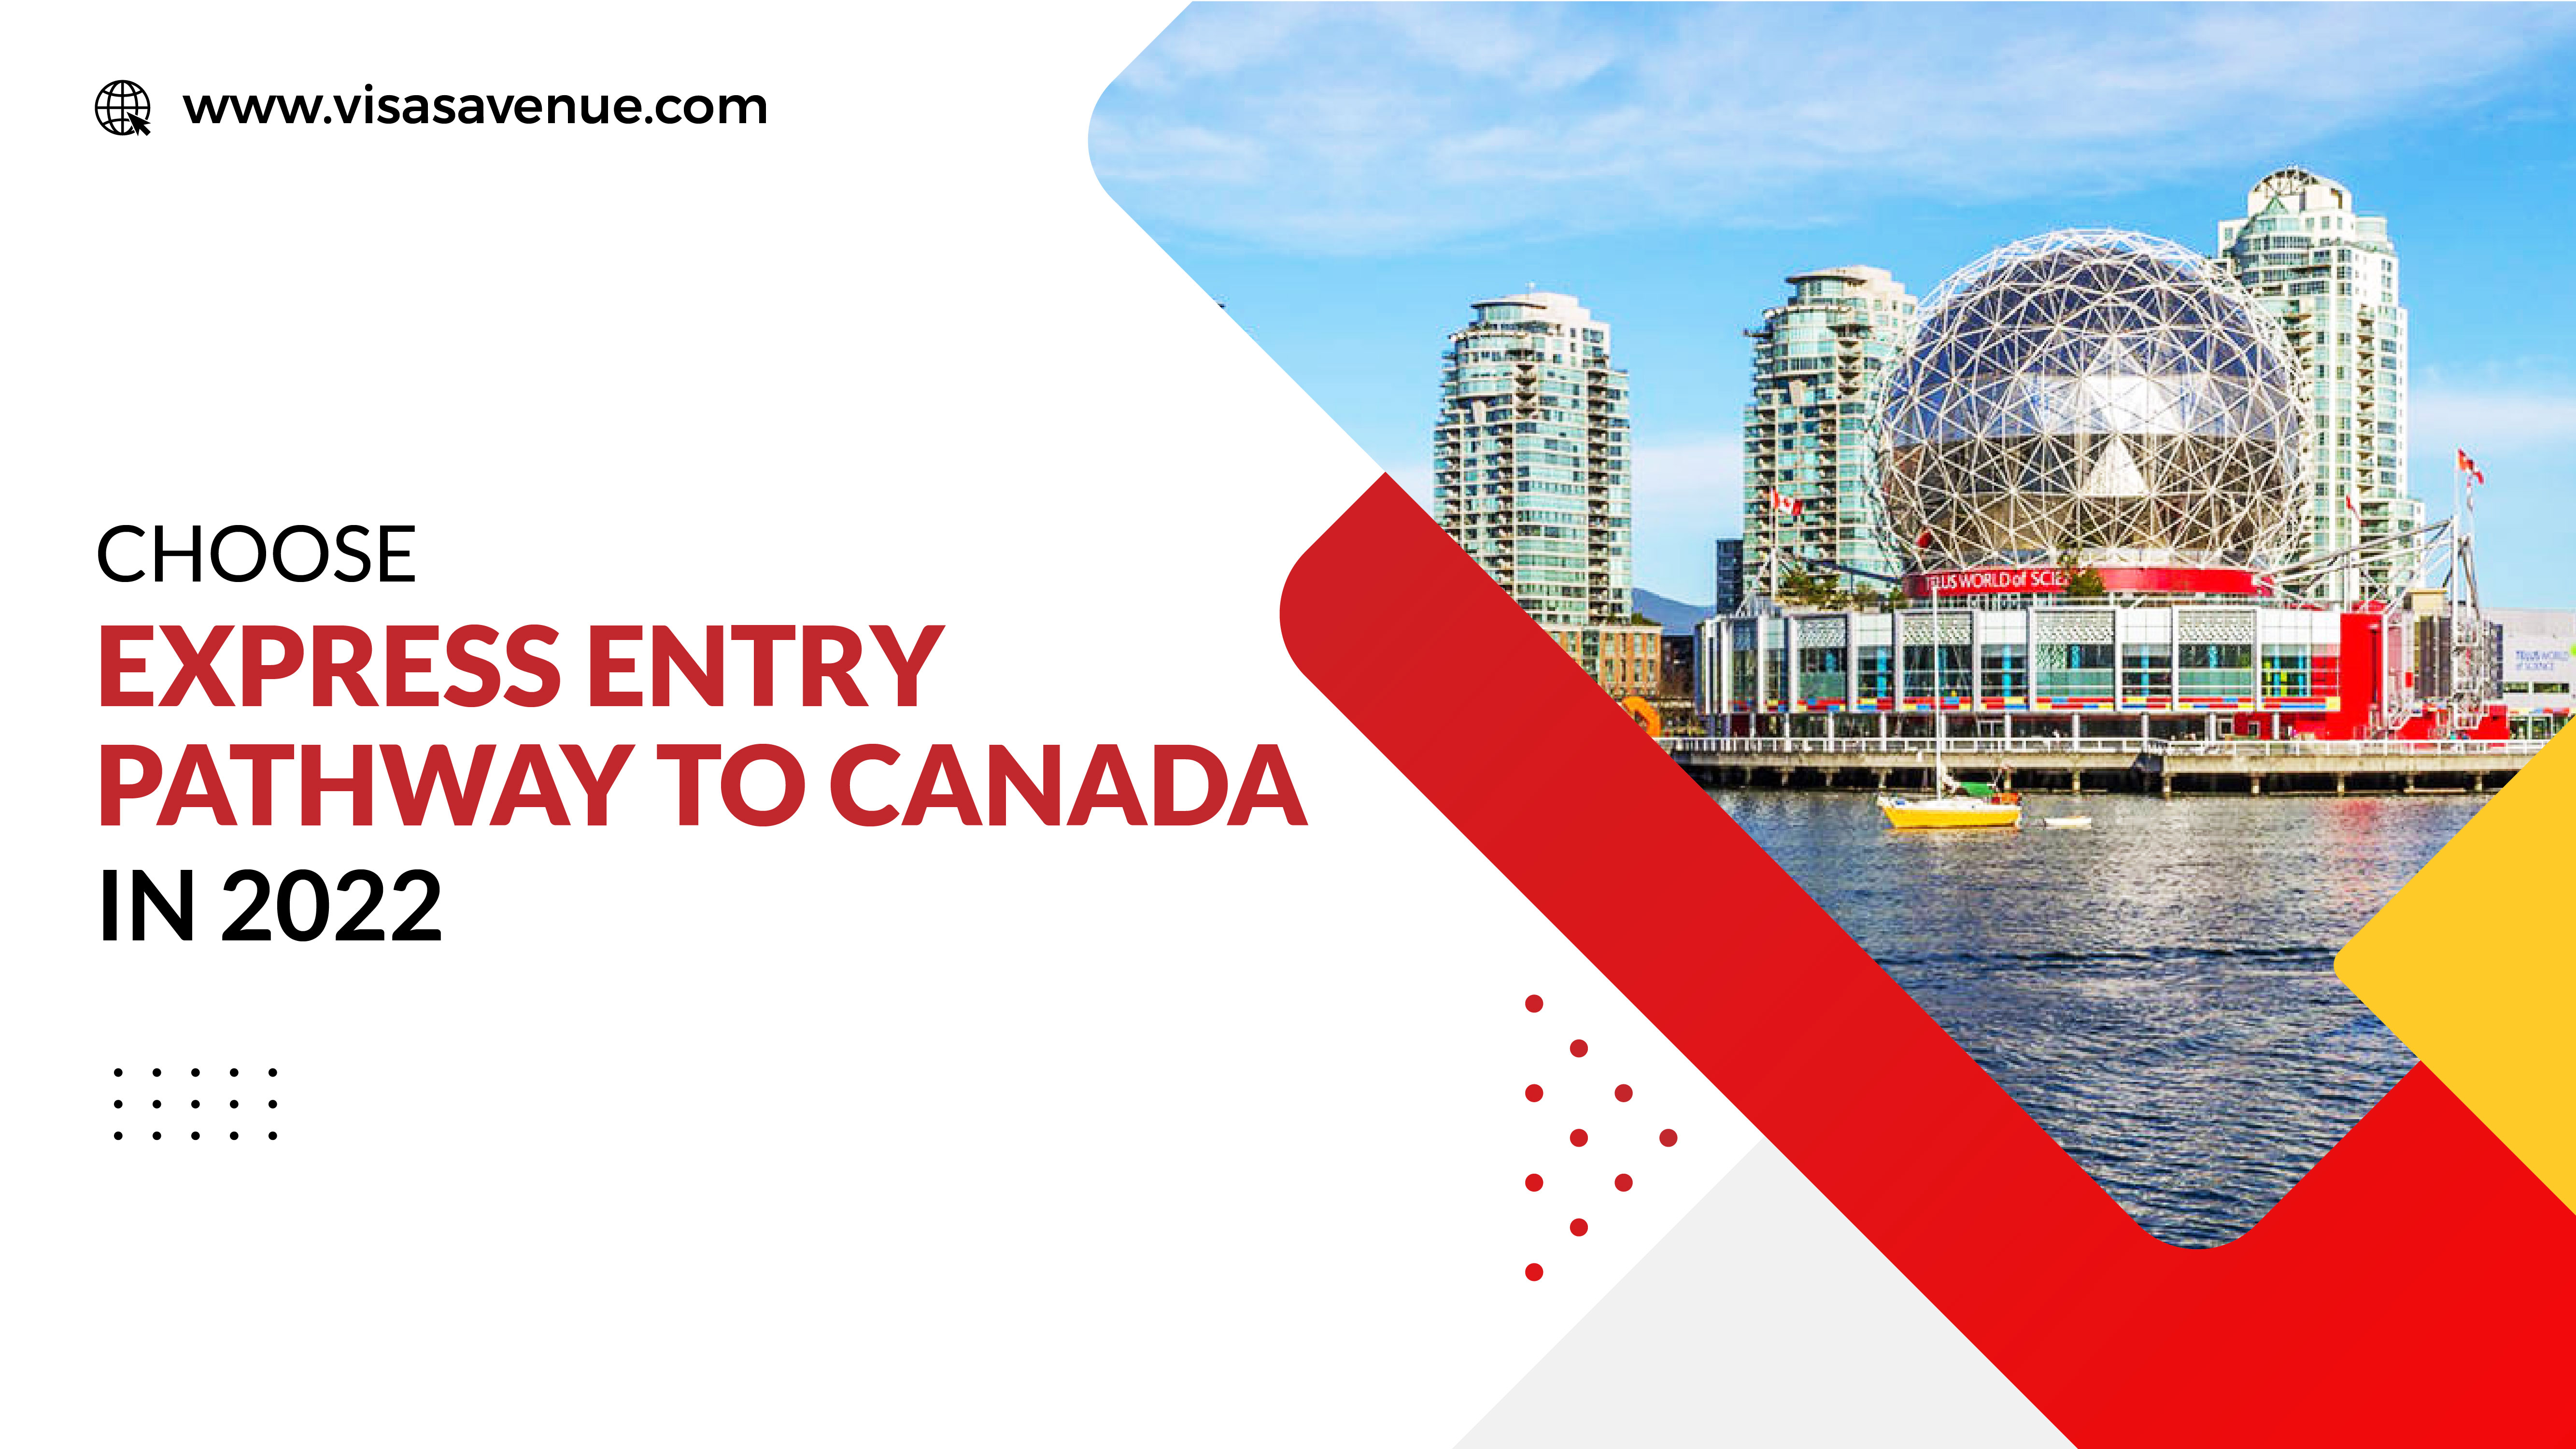 Choose Express Entry Pathway to Canada in 2022